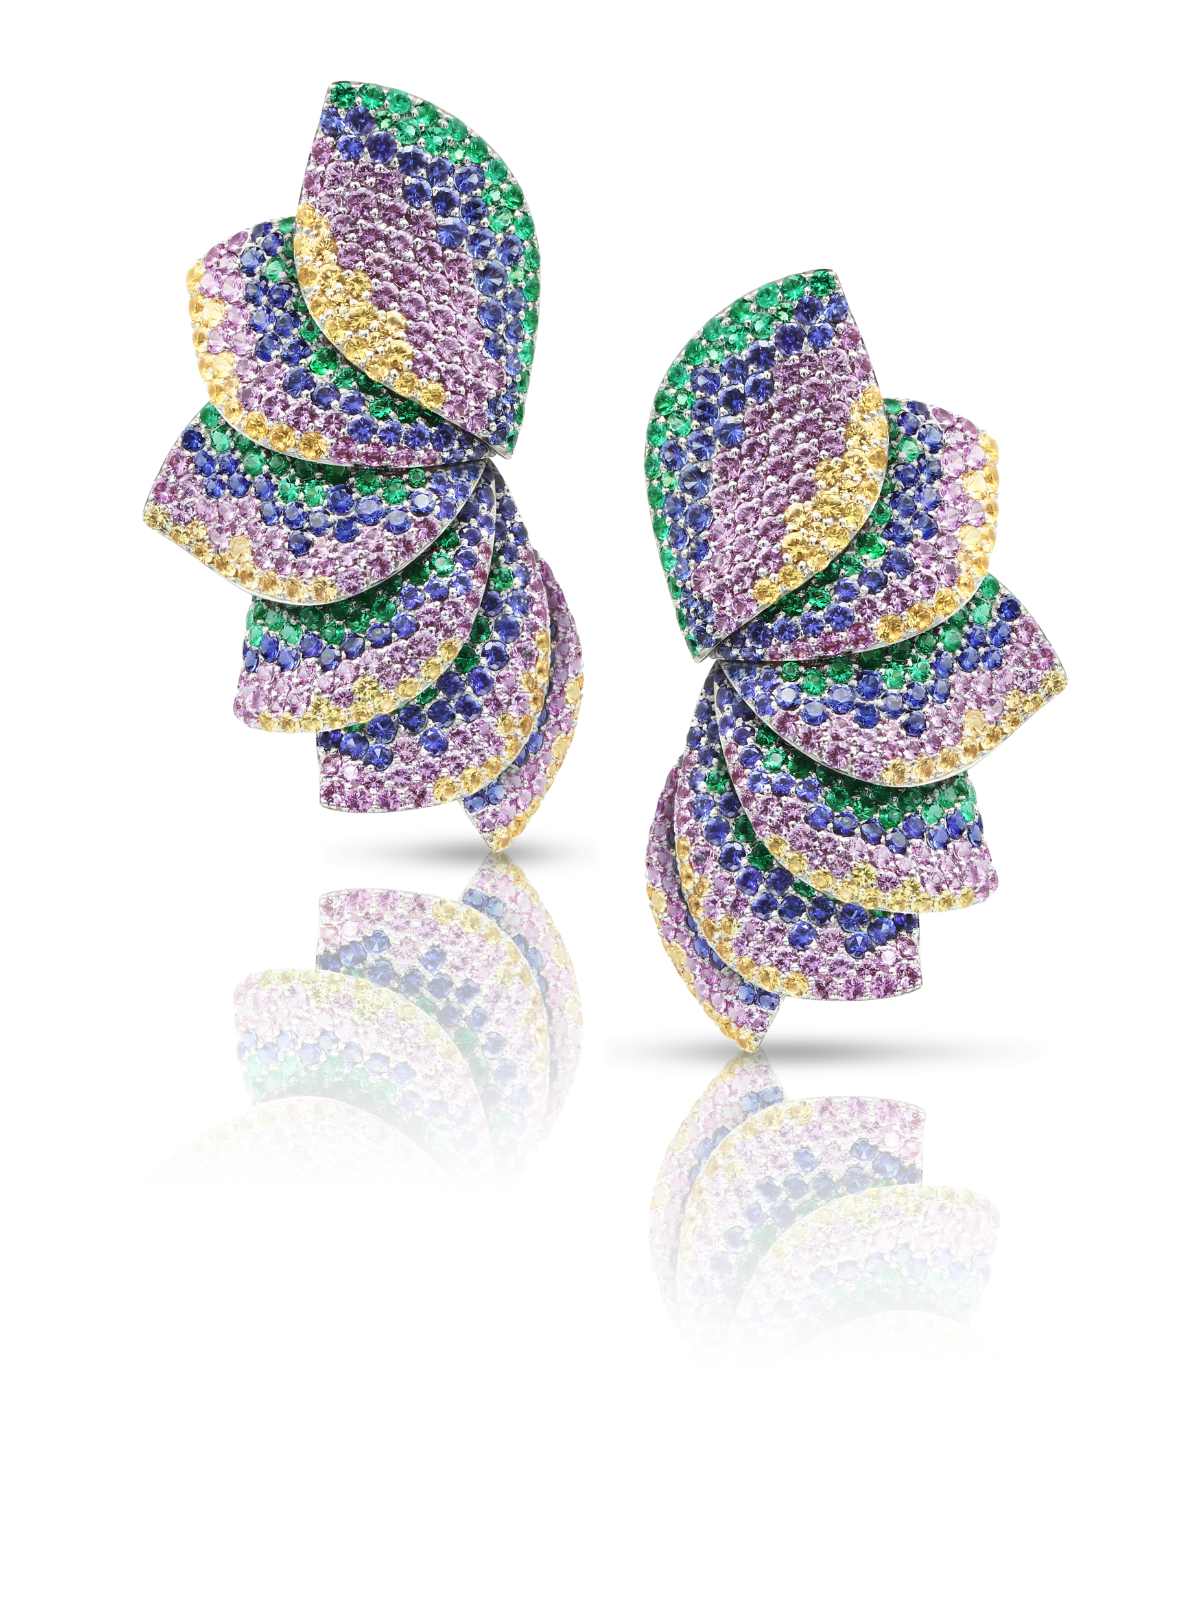 Pasquale Bruni Presents Its New Aleluia’ Rainbowings Collection